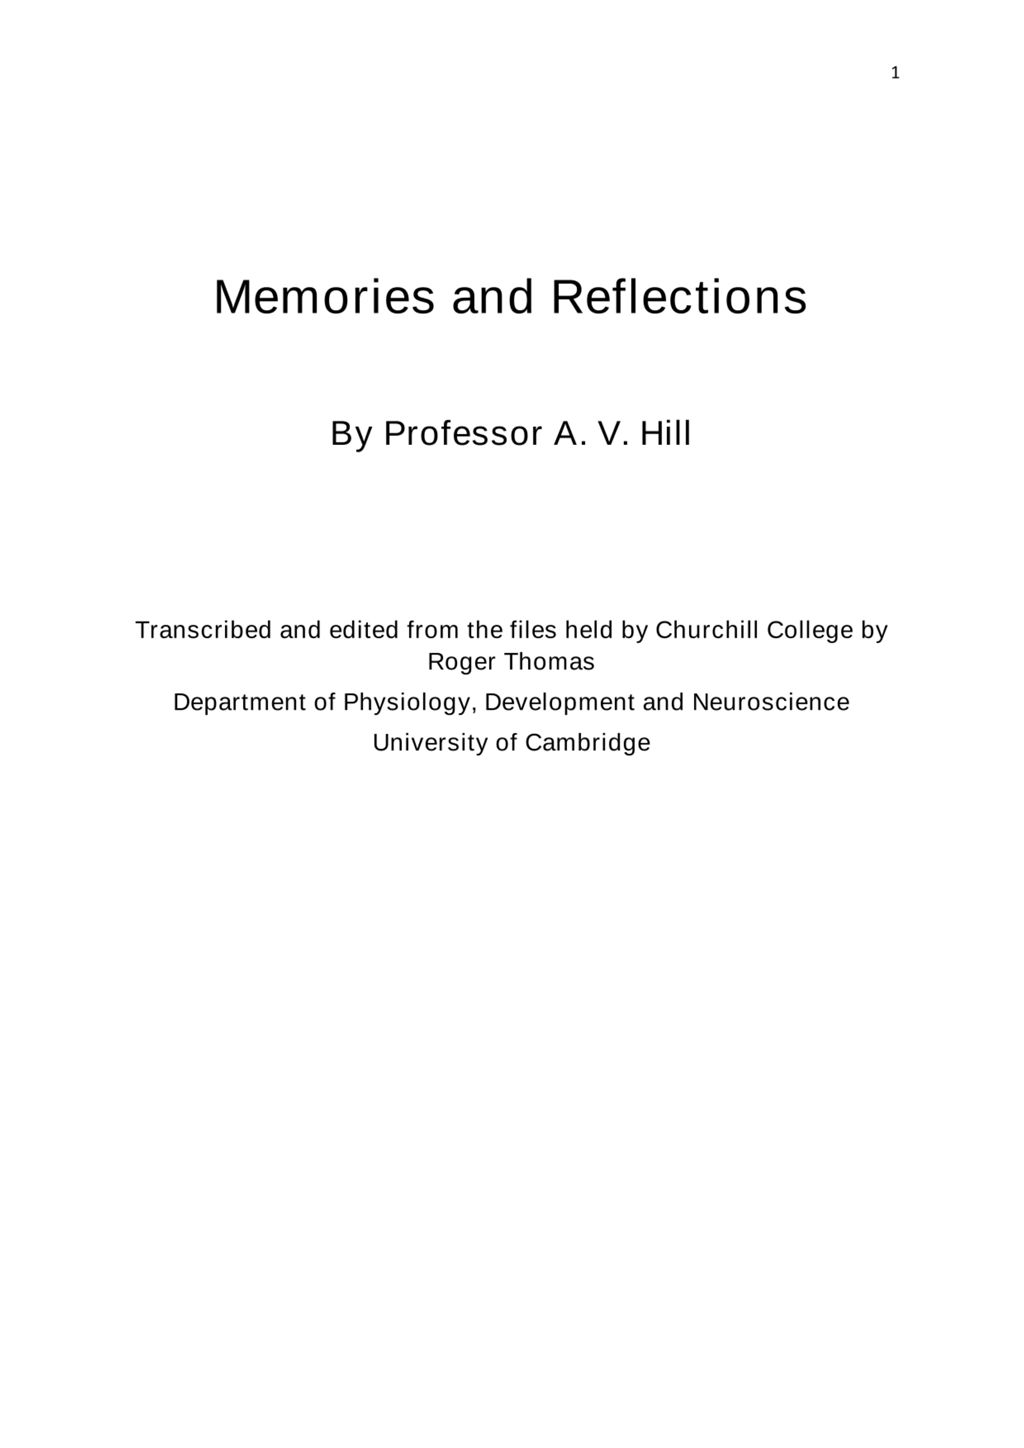 Miniature of Memories and Reflections by AV Hill